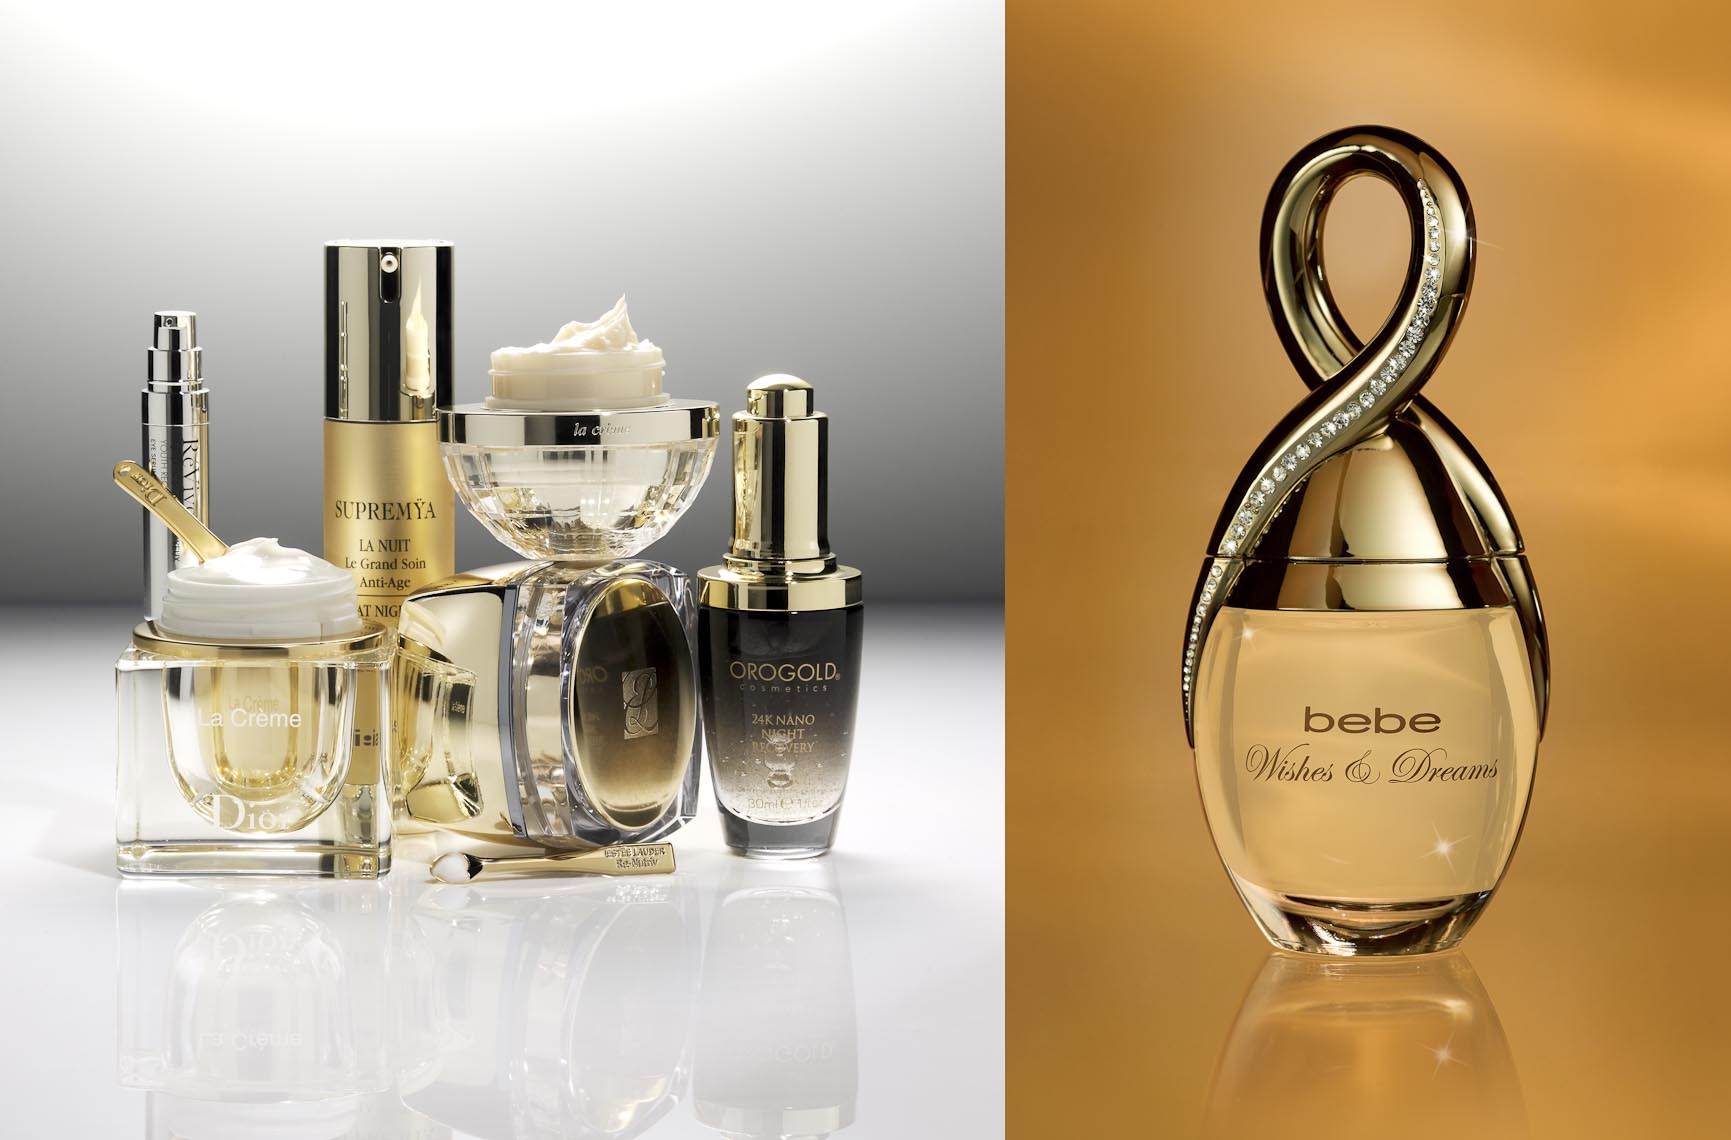 Cosmetics, Bebe Wishes and Dreams Perfume Bottle on Gold - Mike Lorrig